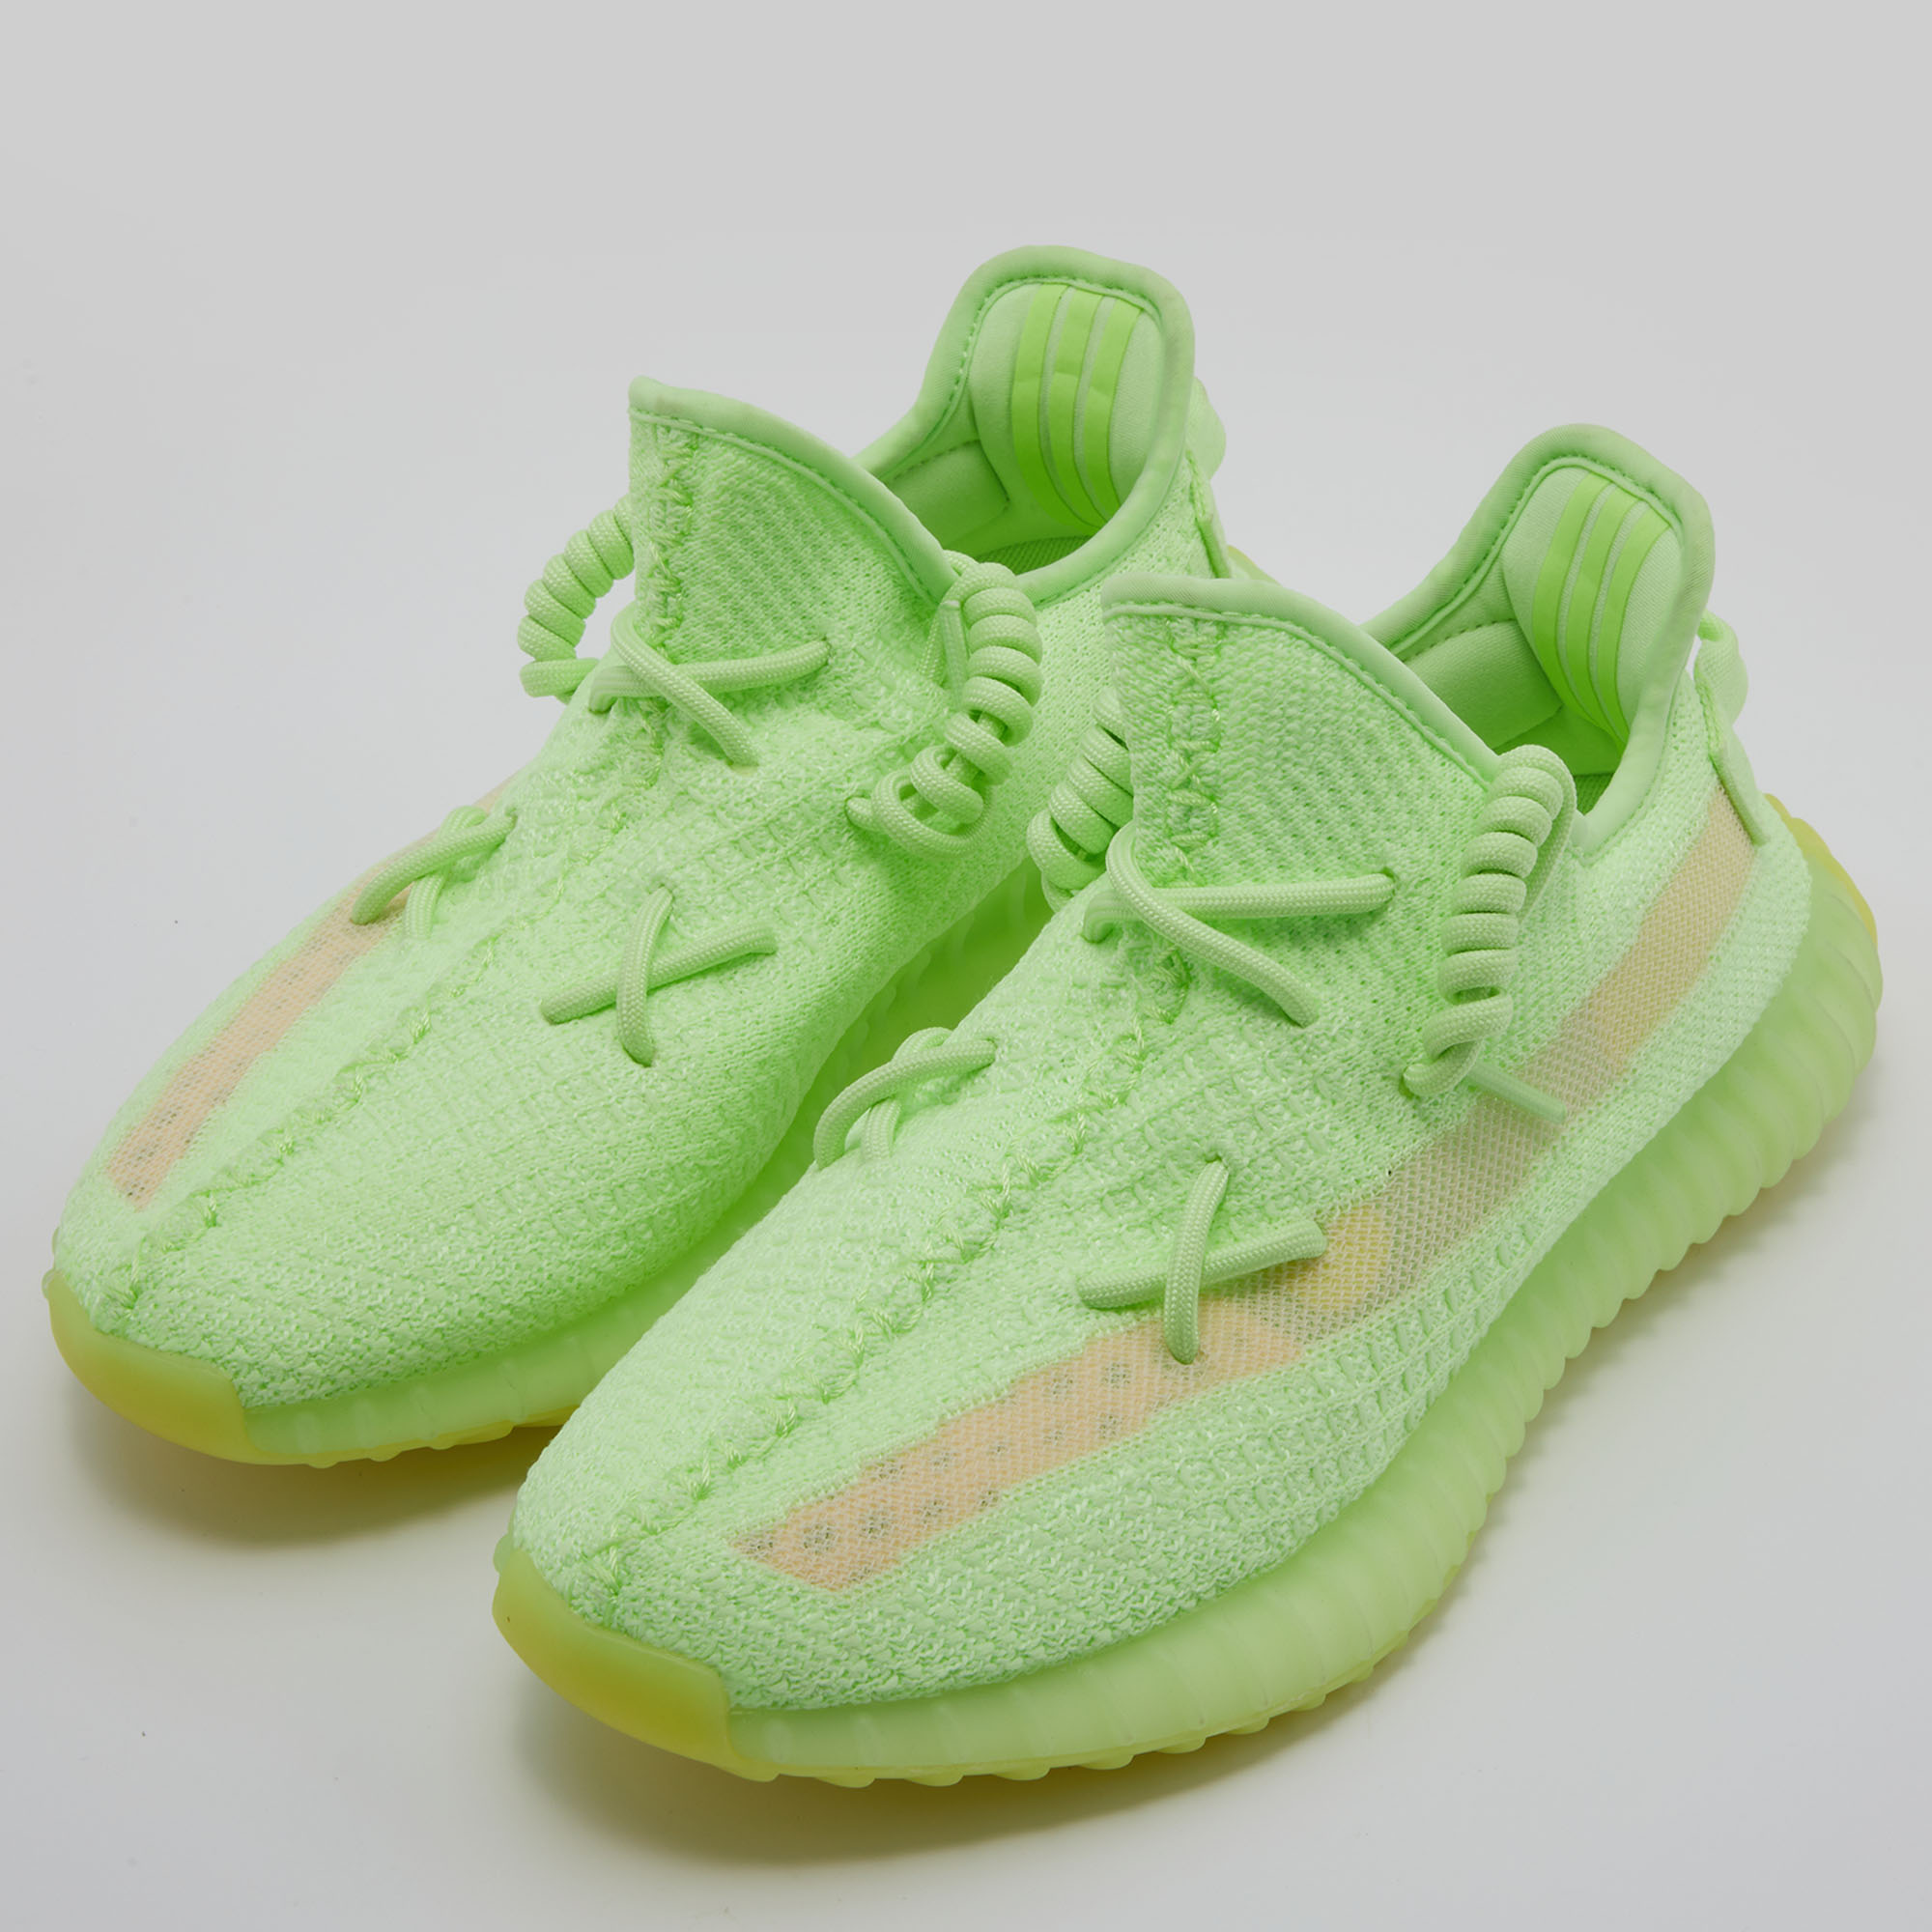 

Yeezy x Adidas Neon Green Knit Fabric Boost 350 V2 Glow Sneakers Size 39 1/3